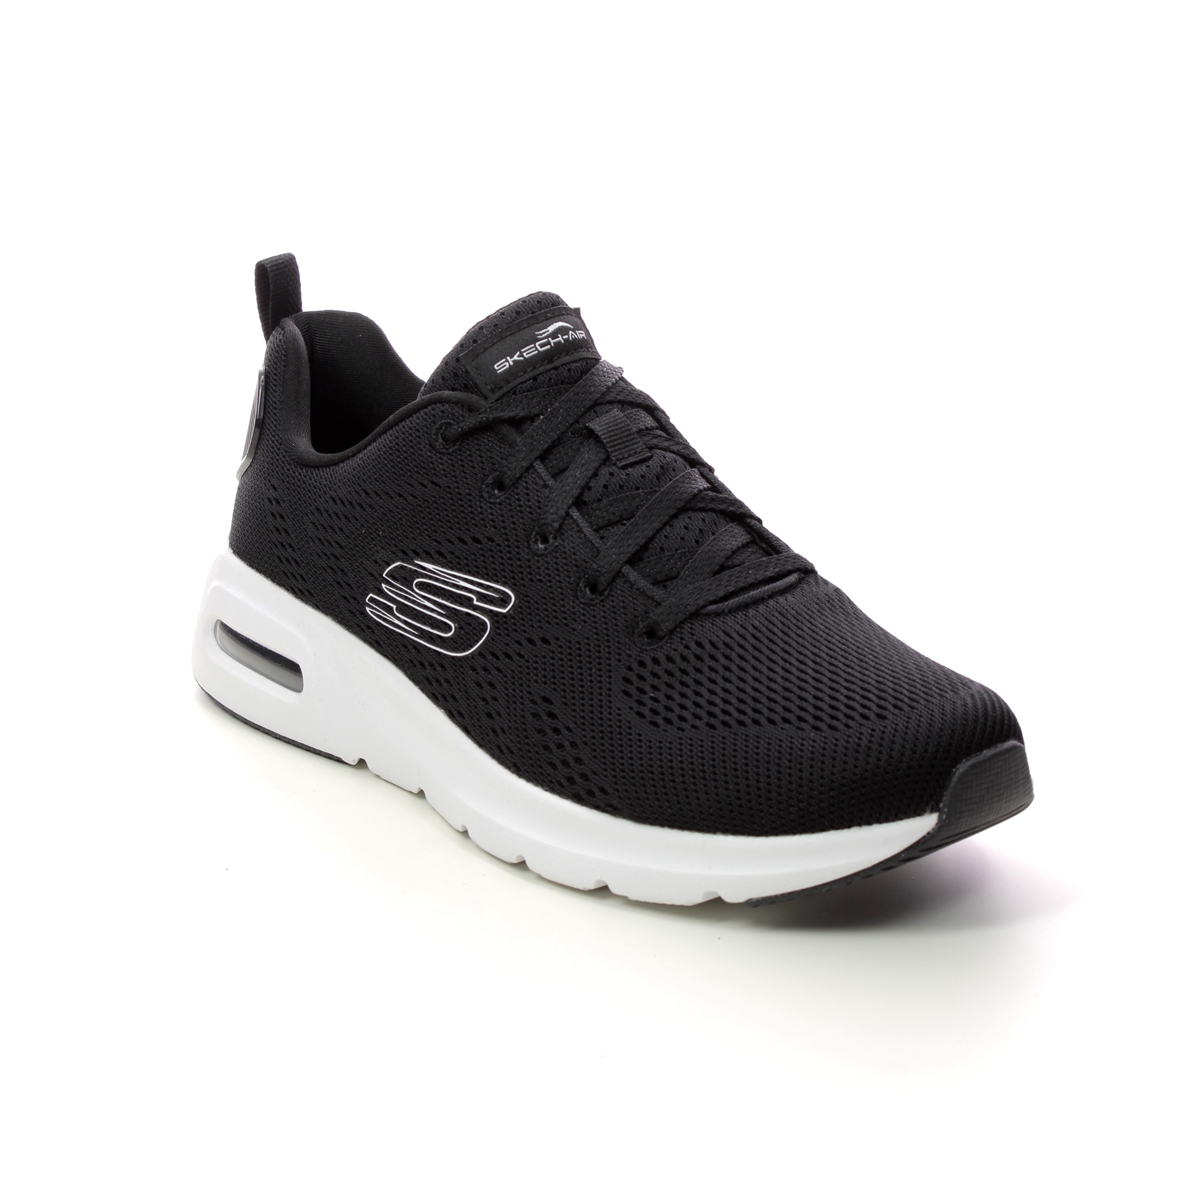 Skechers Skech Air Court Black White Womens Trainers 149948 In Size 4 In Plain Black White